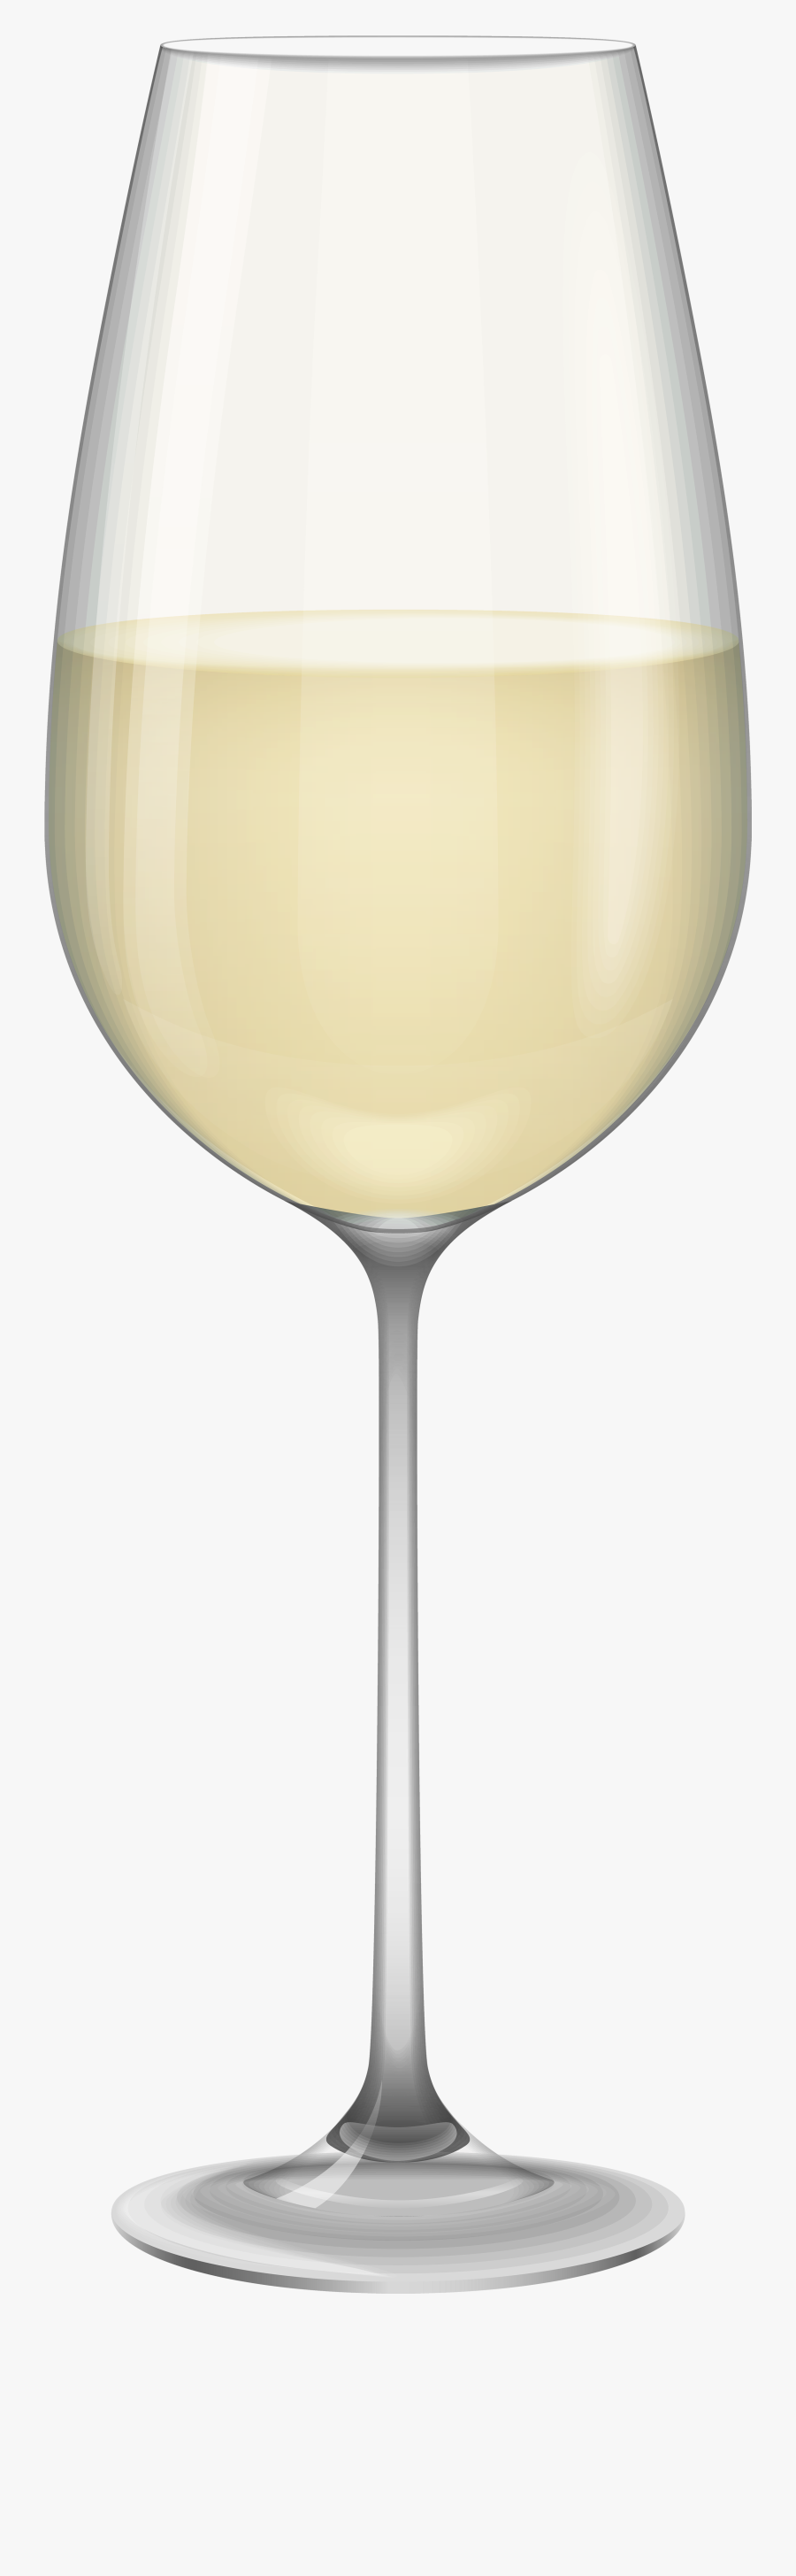 White Wine Glass Png - Wine Glass, Transparent Clipart